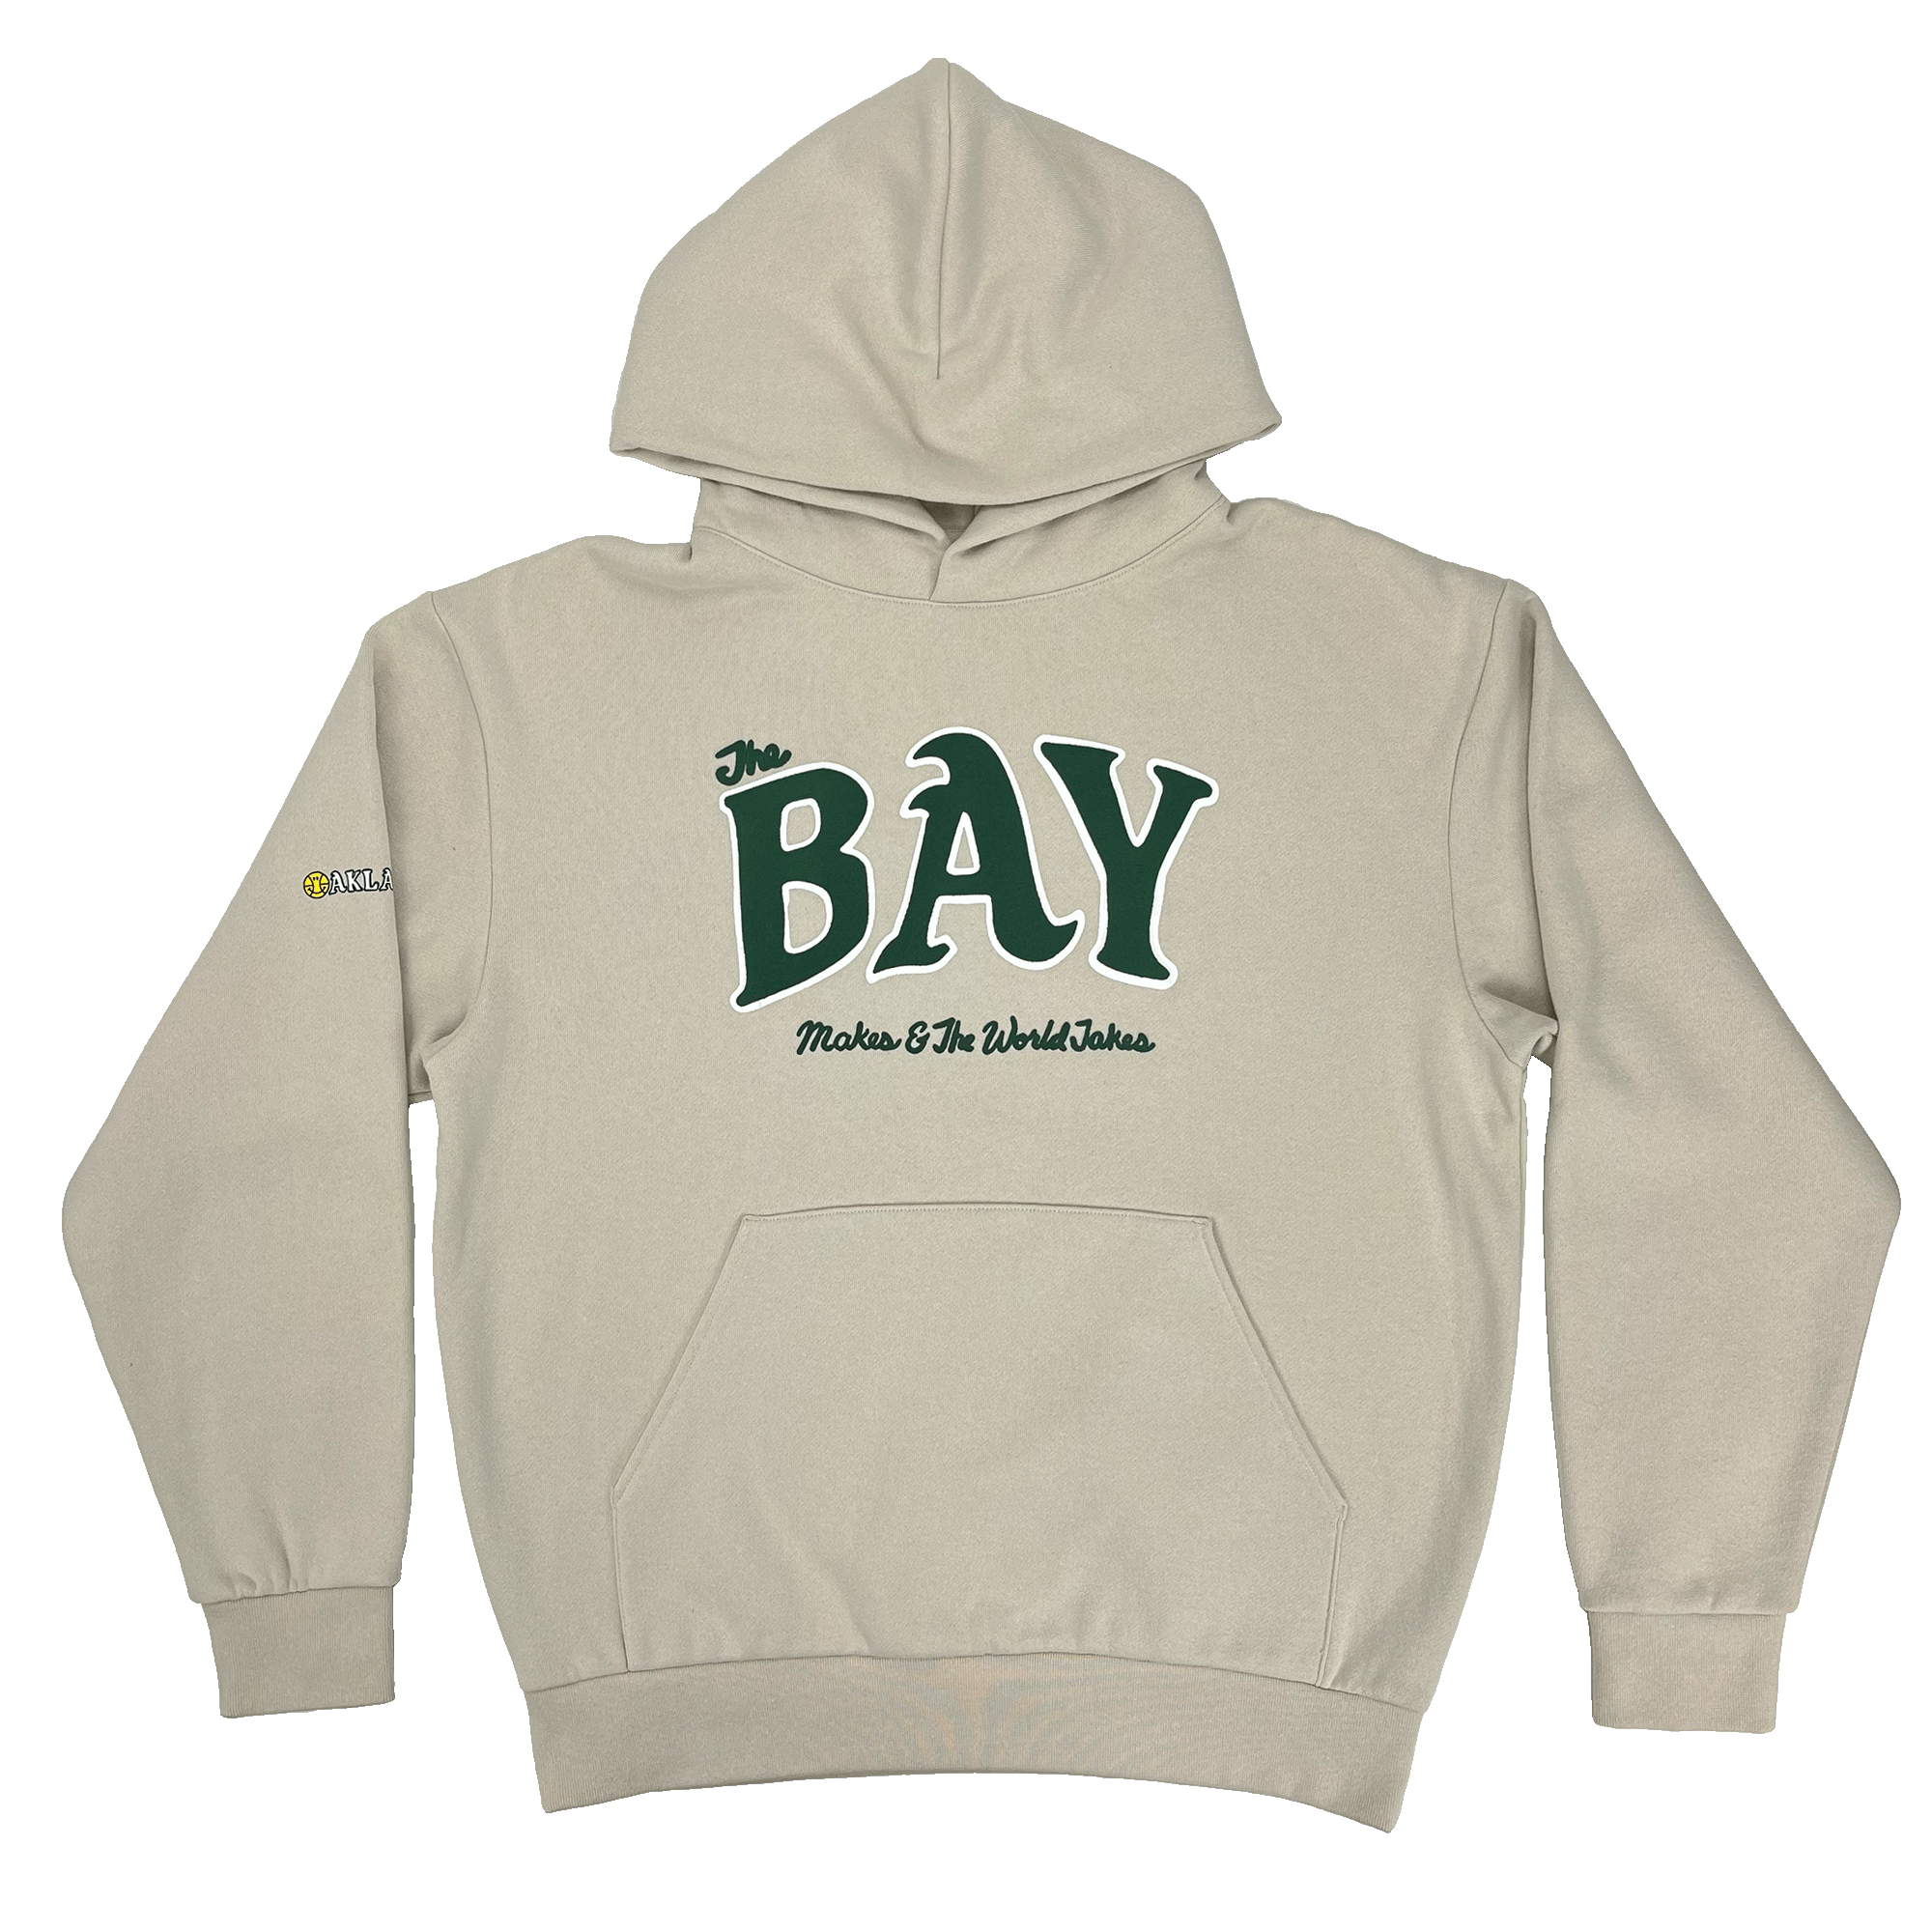 Front view of an ivory pullover hoodie sweatshirt with large green The Bay Makes, The World Takes logo on the front chest.